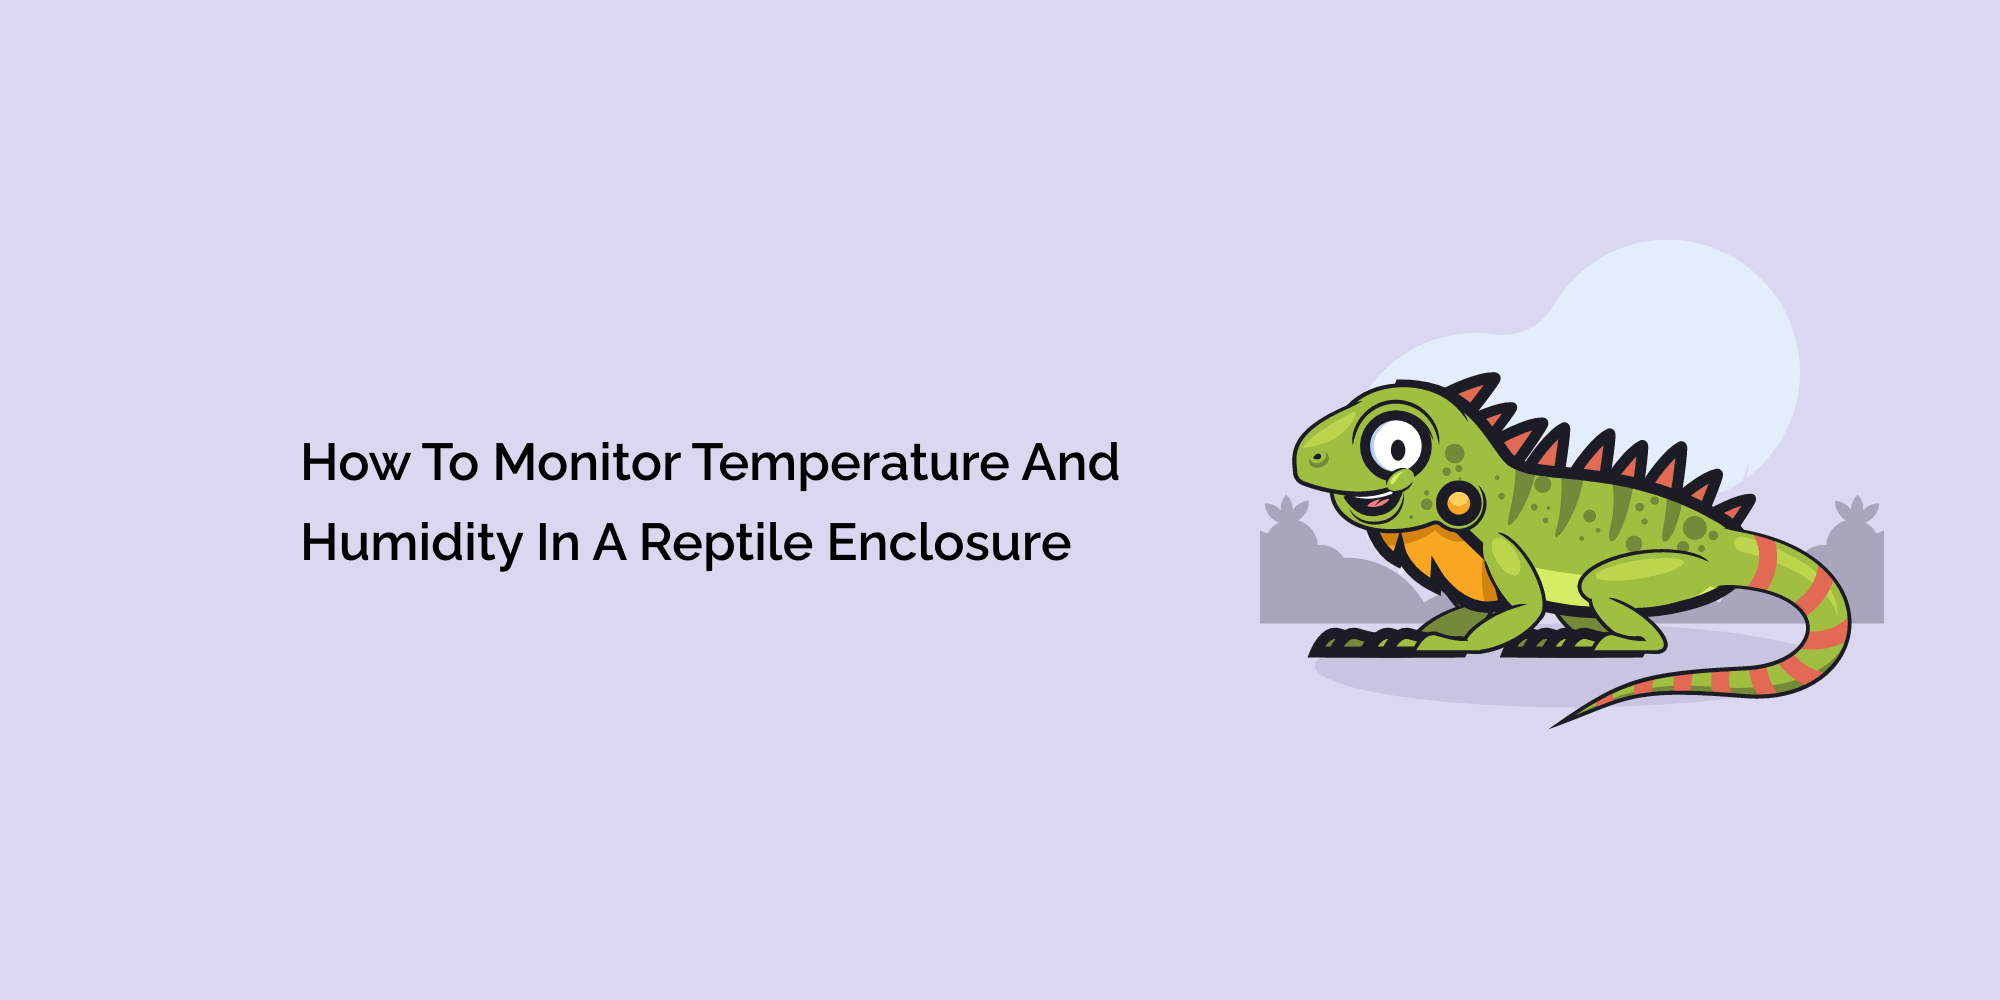 How to Monitor Temperature and Humidity in a Reptile Enclosure